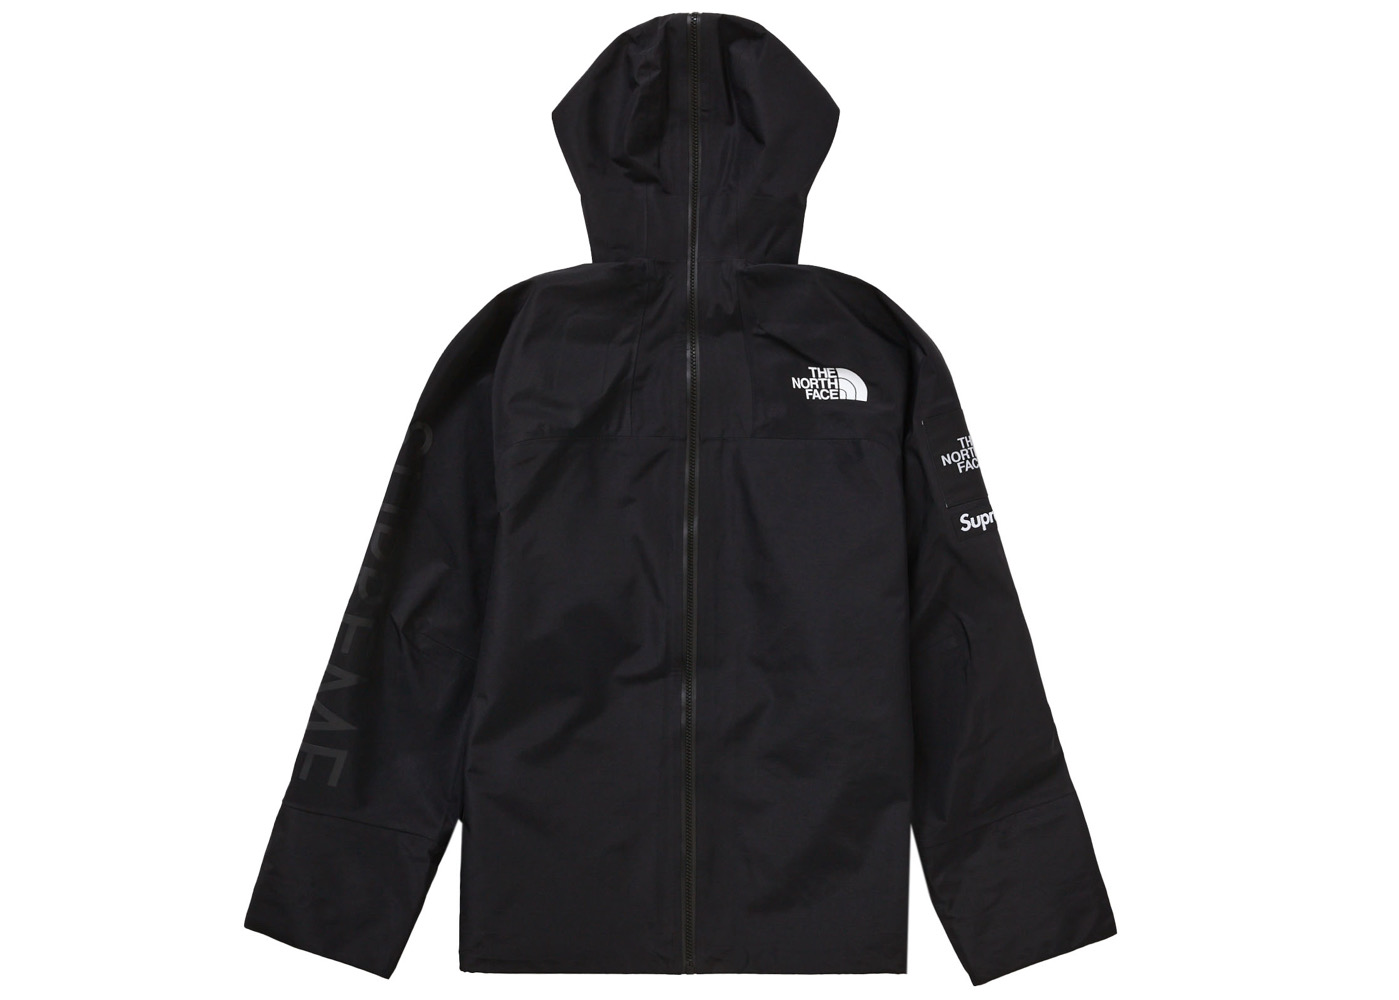 supreme the north face Split Taped XL96000円は可能でしょうか